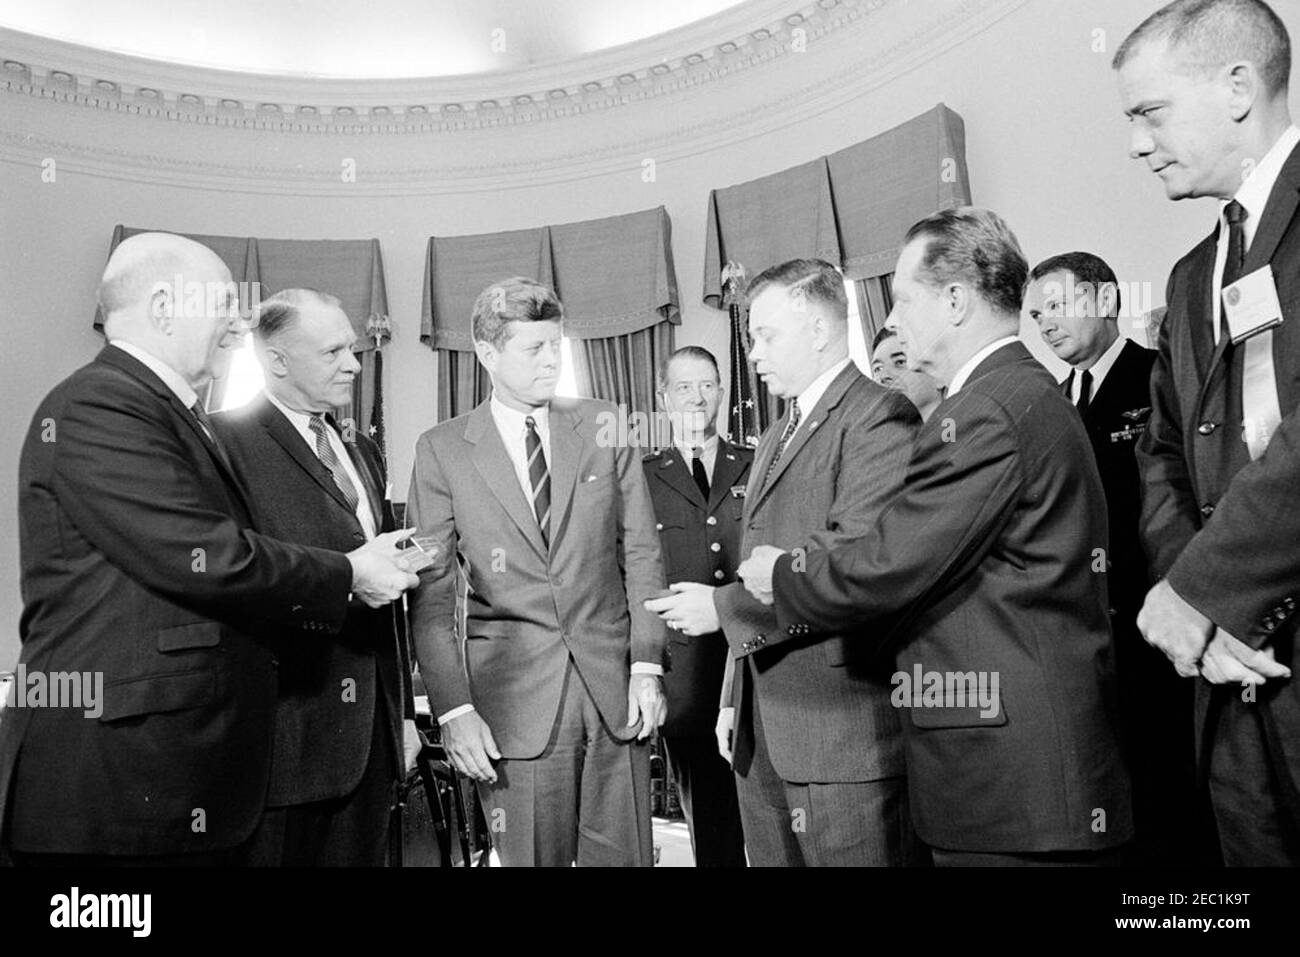 Presentation of honorary life memberships in the armed services associations, 10:00AM. President John F. Kennedy receives honorary life memberships in four armed services organizations; representatives from each organization presented President Kennedy with gold membership cards. Left to right (in foreground): President of the Association of the United States Army, Lieutenant General Milton G. Baker; National Vice President of the Navy League, Harold E. Wirth; President Kennedy; President of the Marine Corps League, Raymond B. Butts; President of the Air Force Association, Major General John B Stock Photo